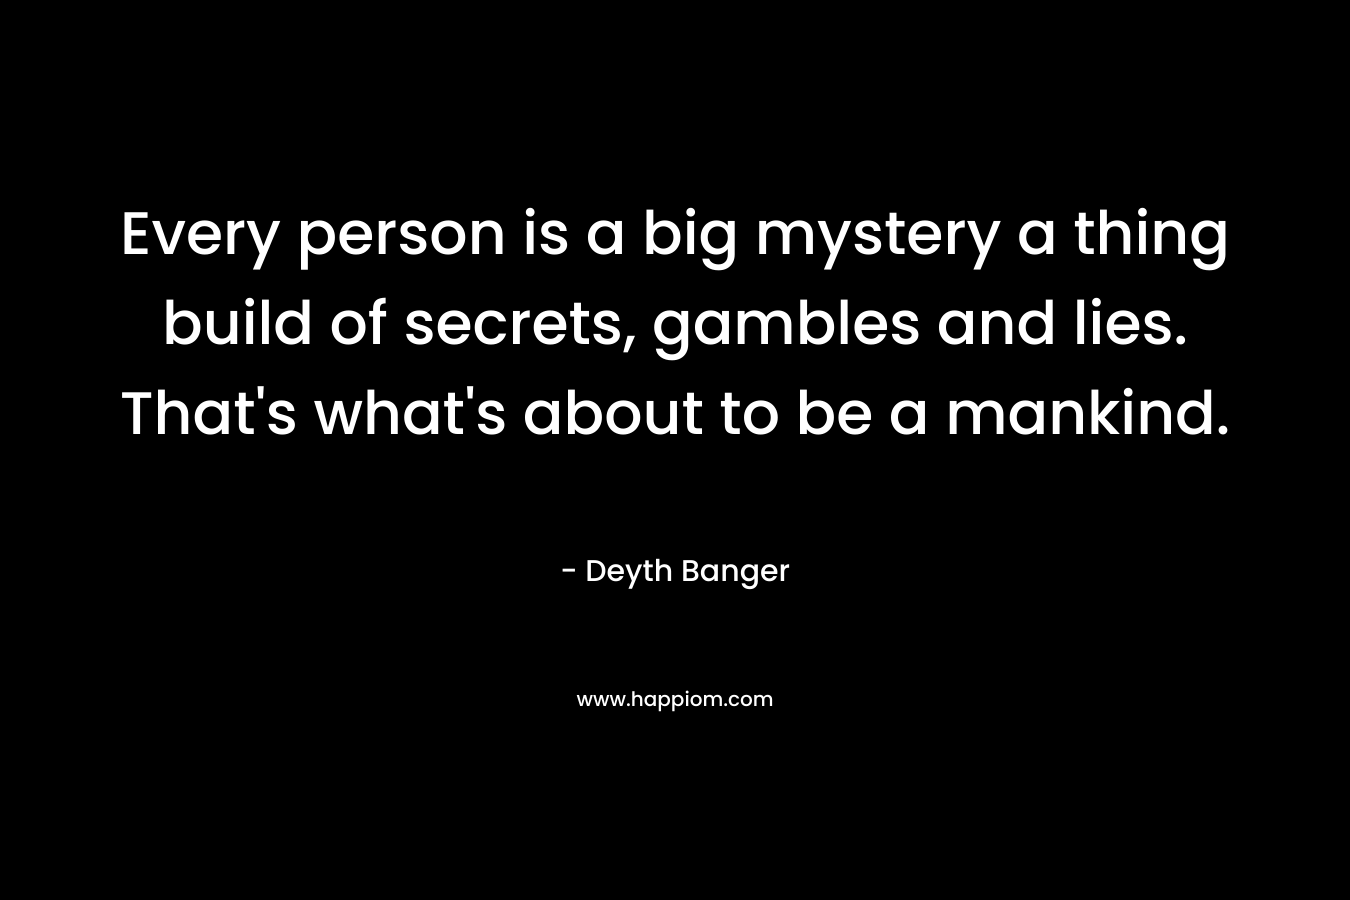 Every person is a big mystery a thing build of secrets, gambles and lies. That’s what’s about to be a mankind. – Deyth Banger